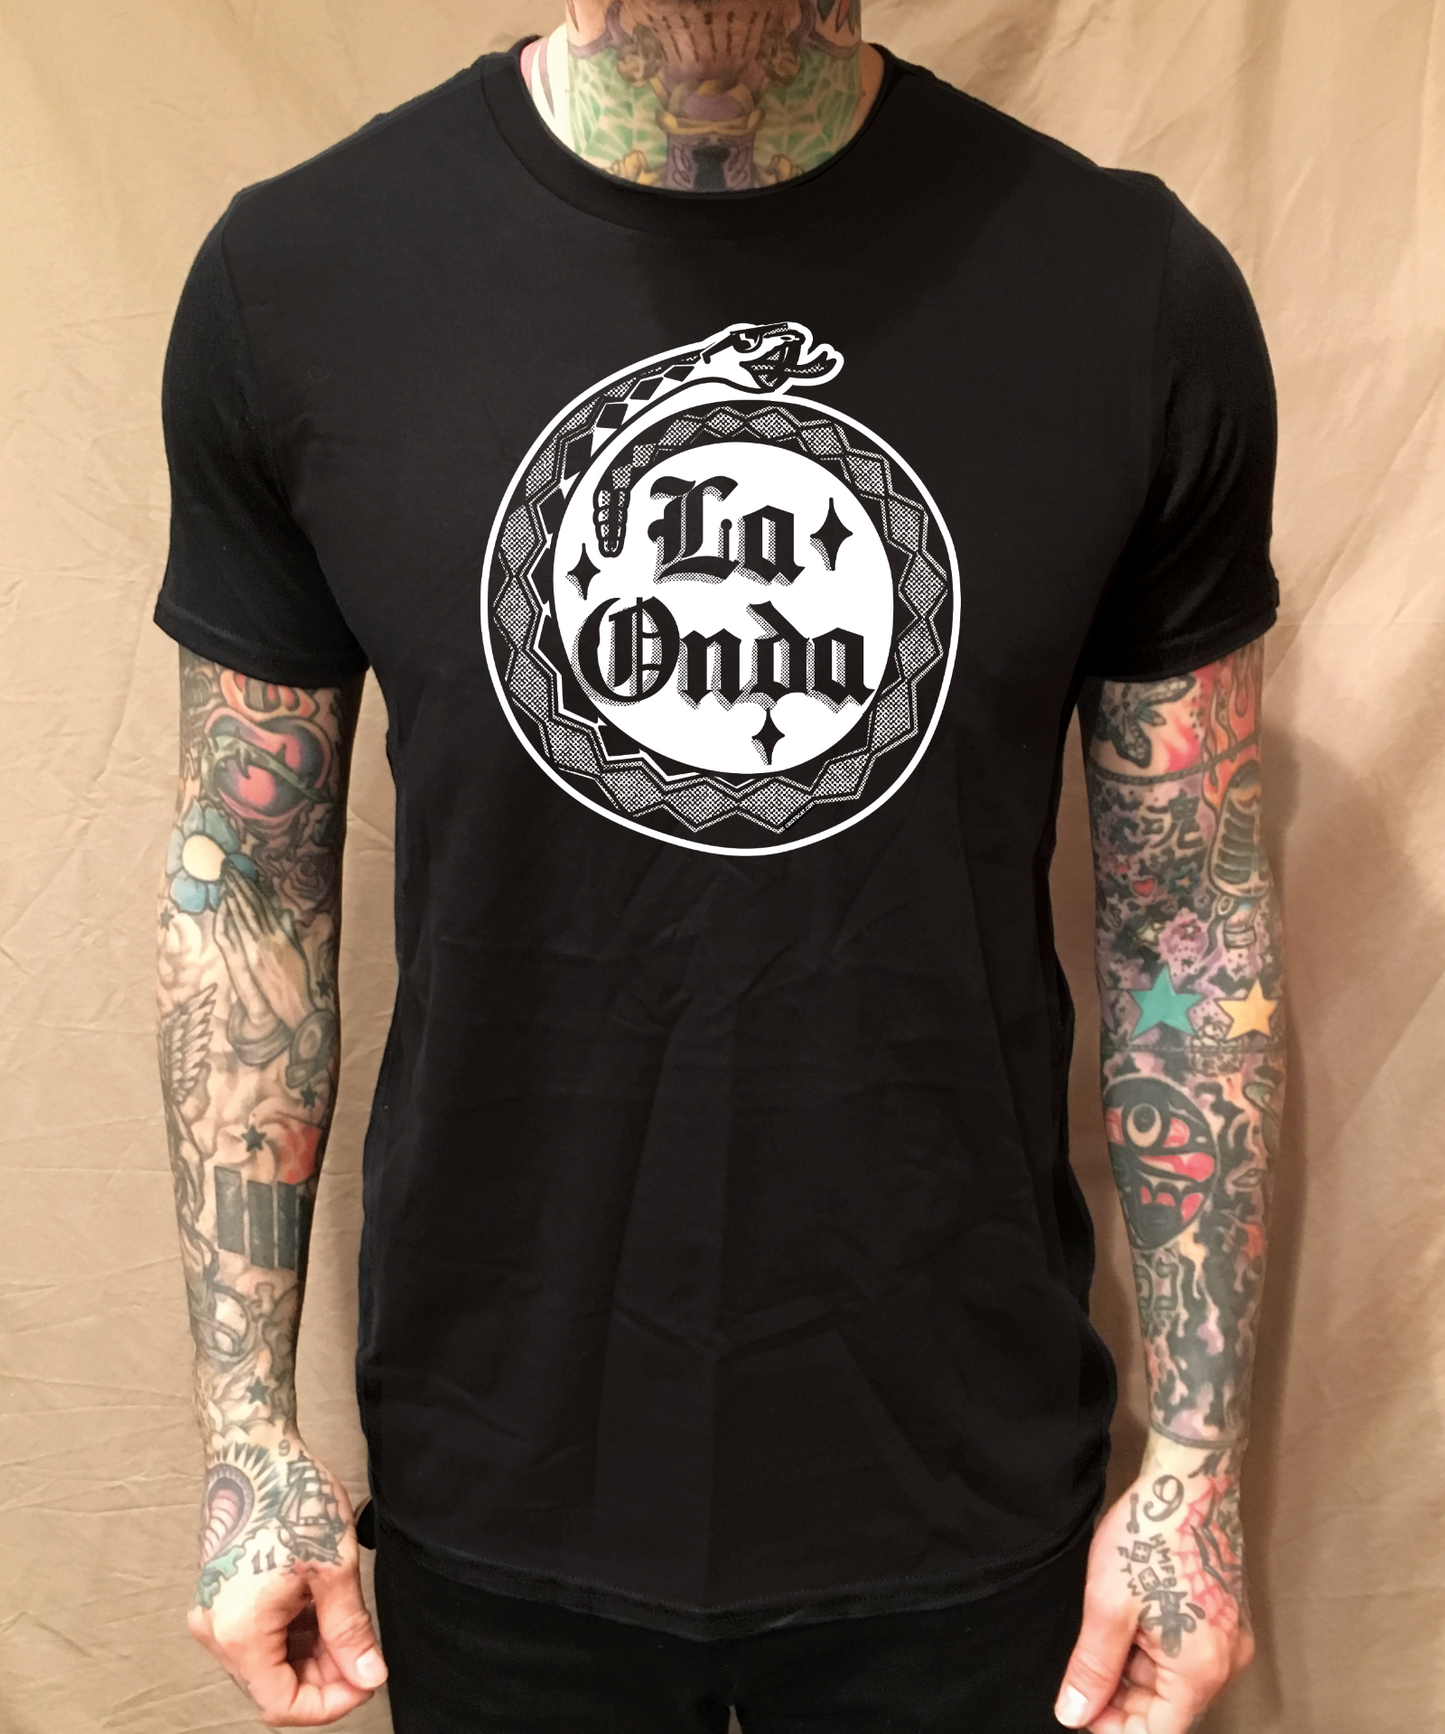 LA ONDA SNAKE 2.0 BLACK TEE BLOOD IN BLOOD OUT - cristocatofficial